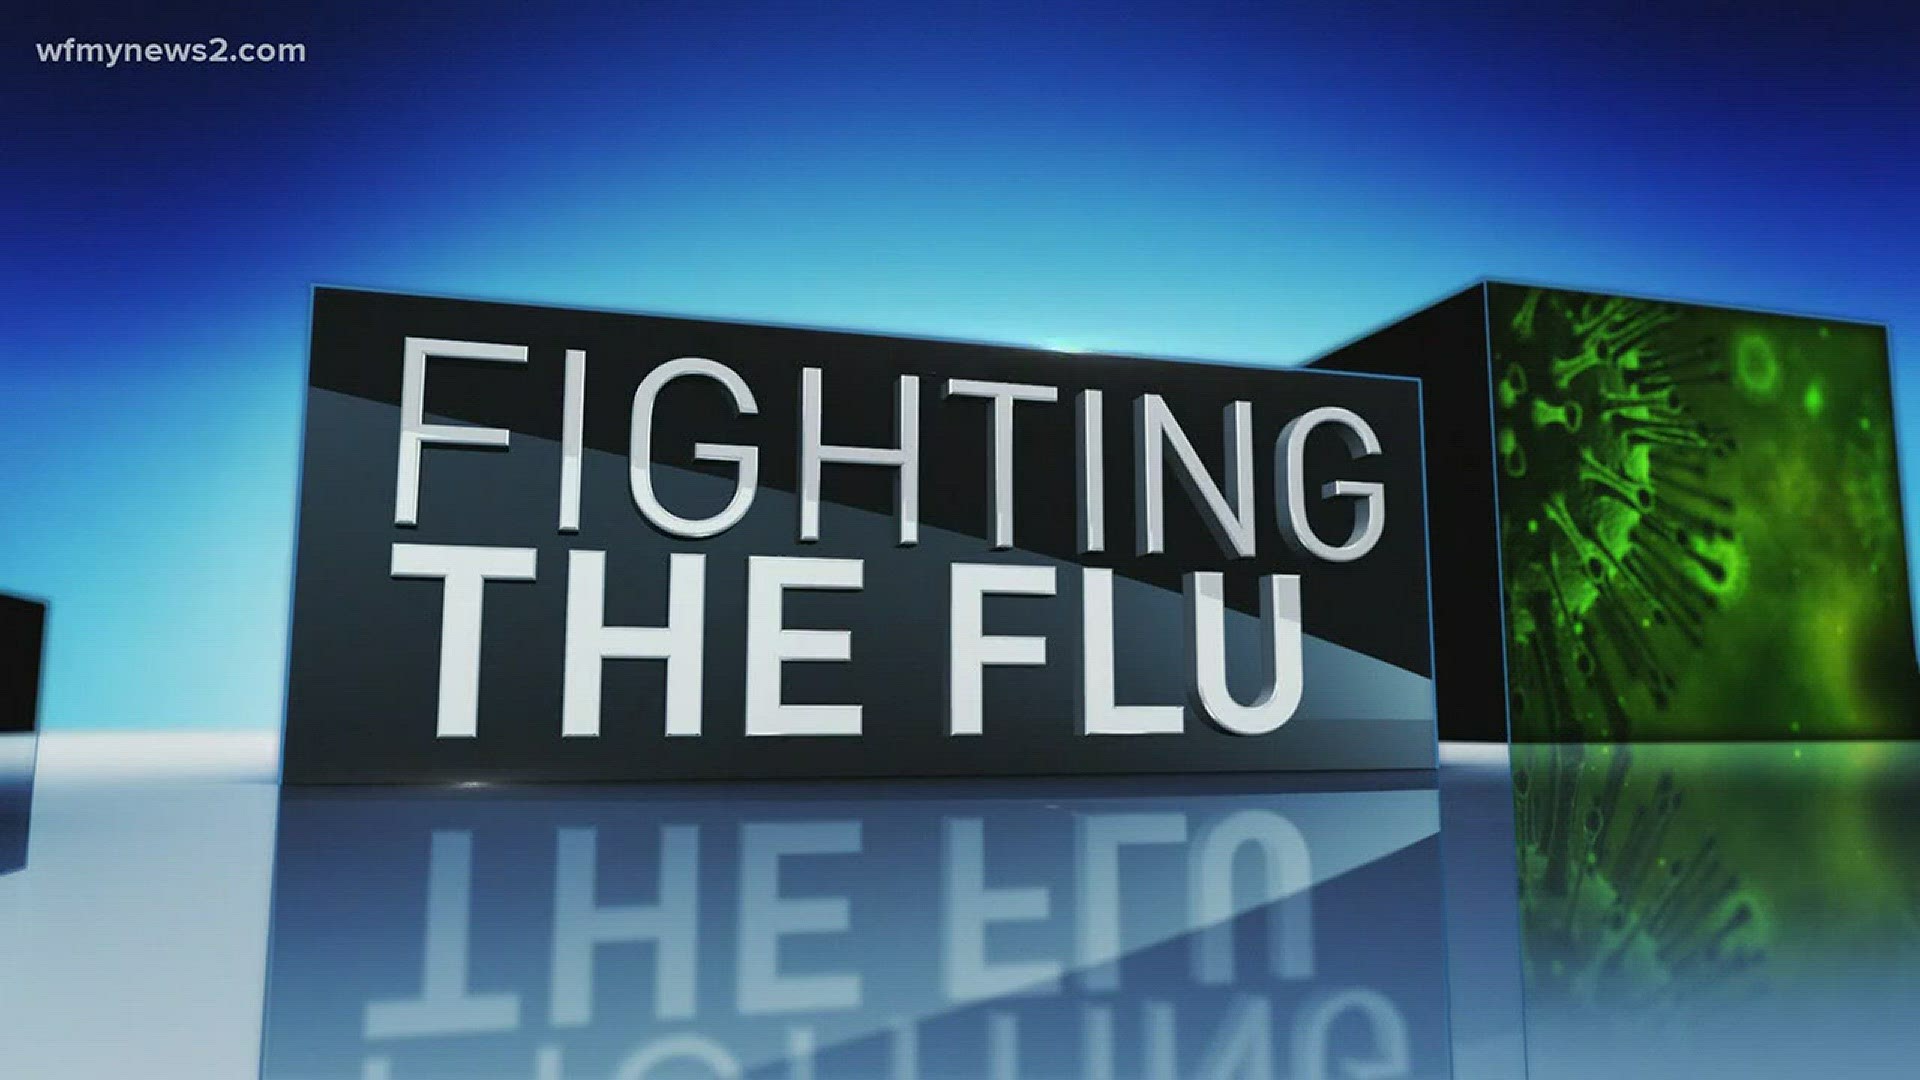 Doctors prescribe Tamiflu and its generic version to help lessen the severity of the flu, but even with doctor's orders some people can't afford to get their prescription filled.